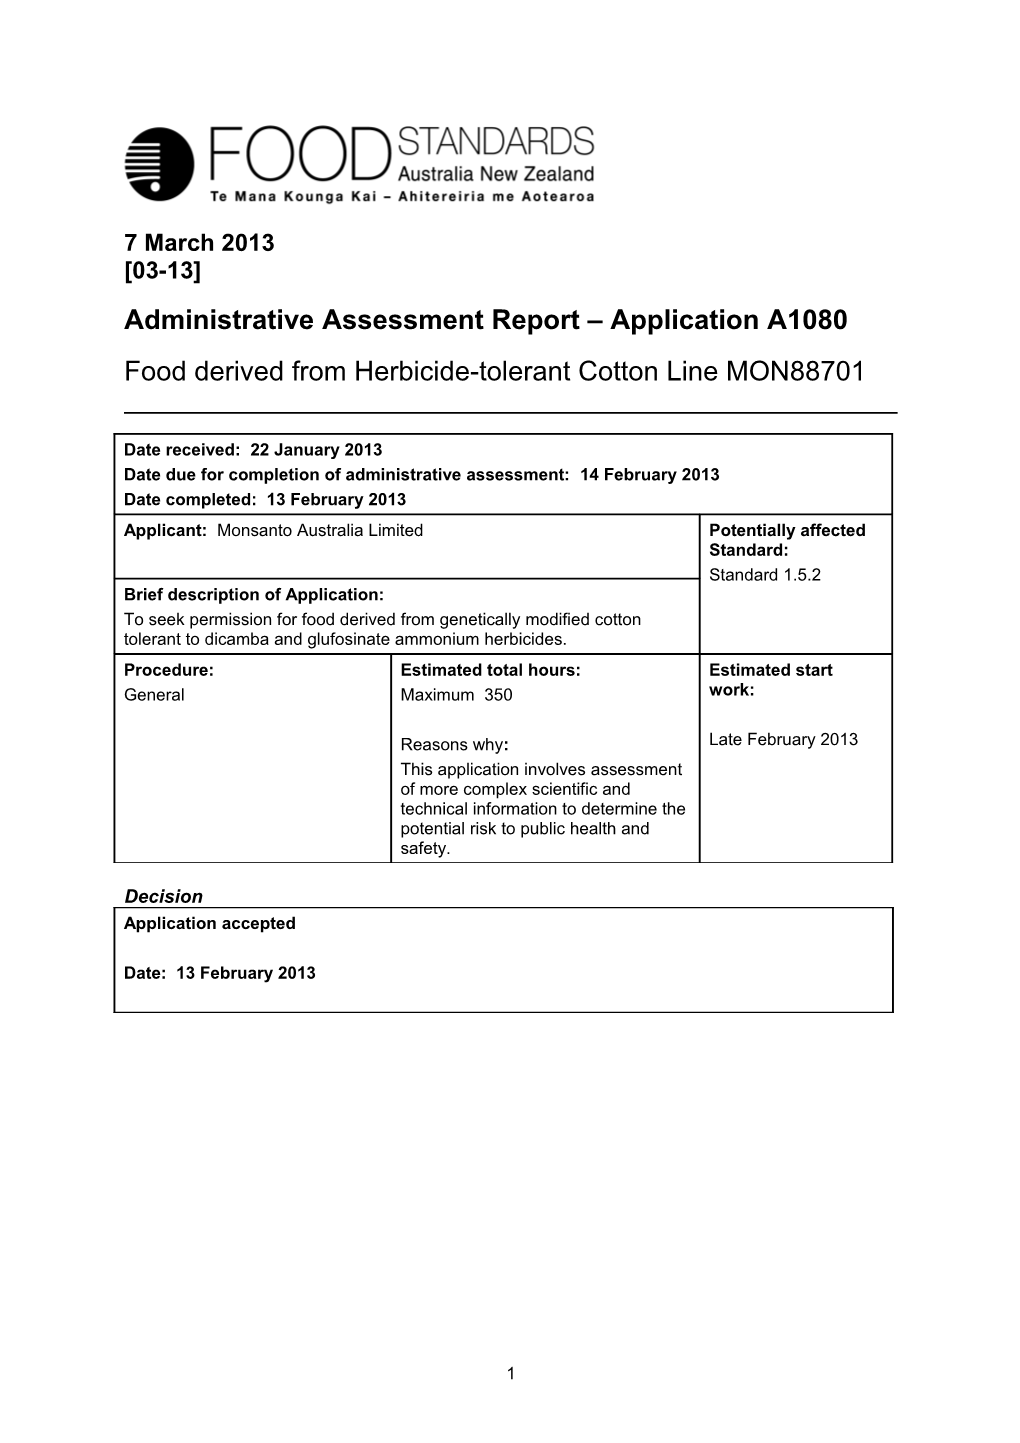 Administrative Assessment Report Application A1080